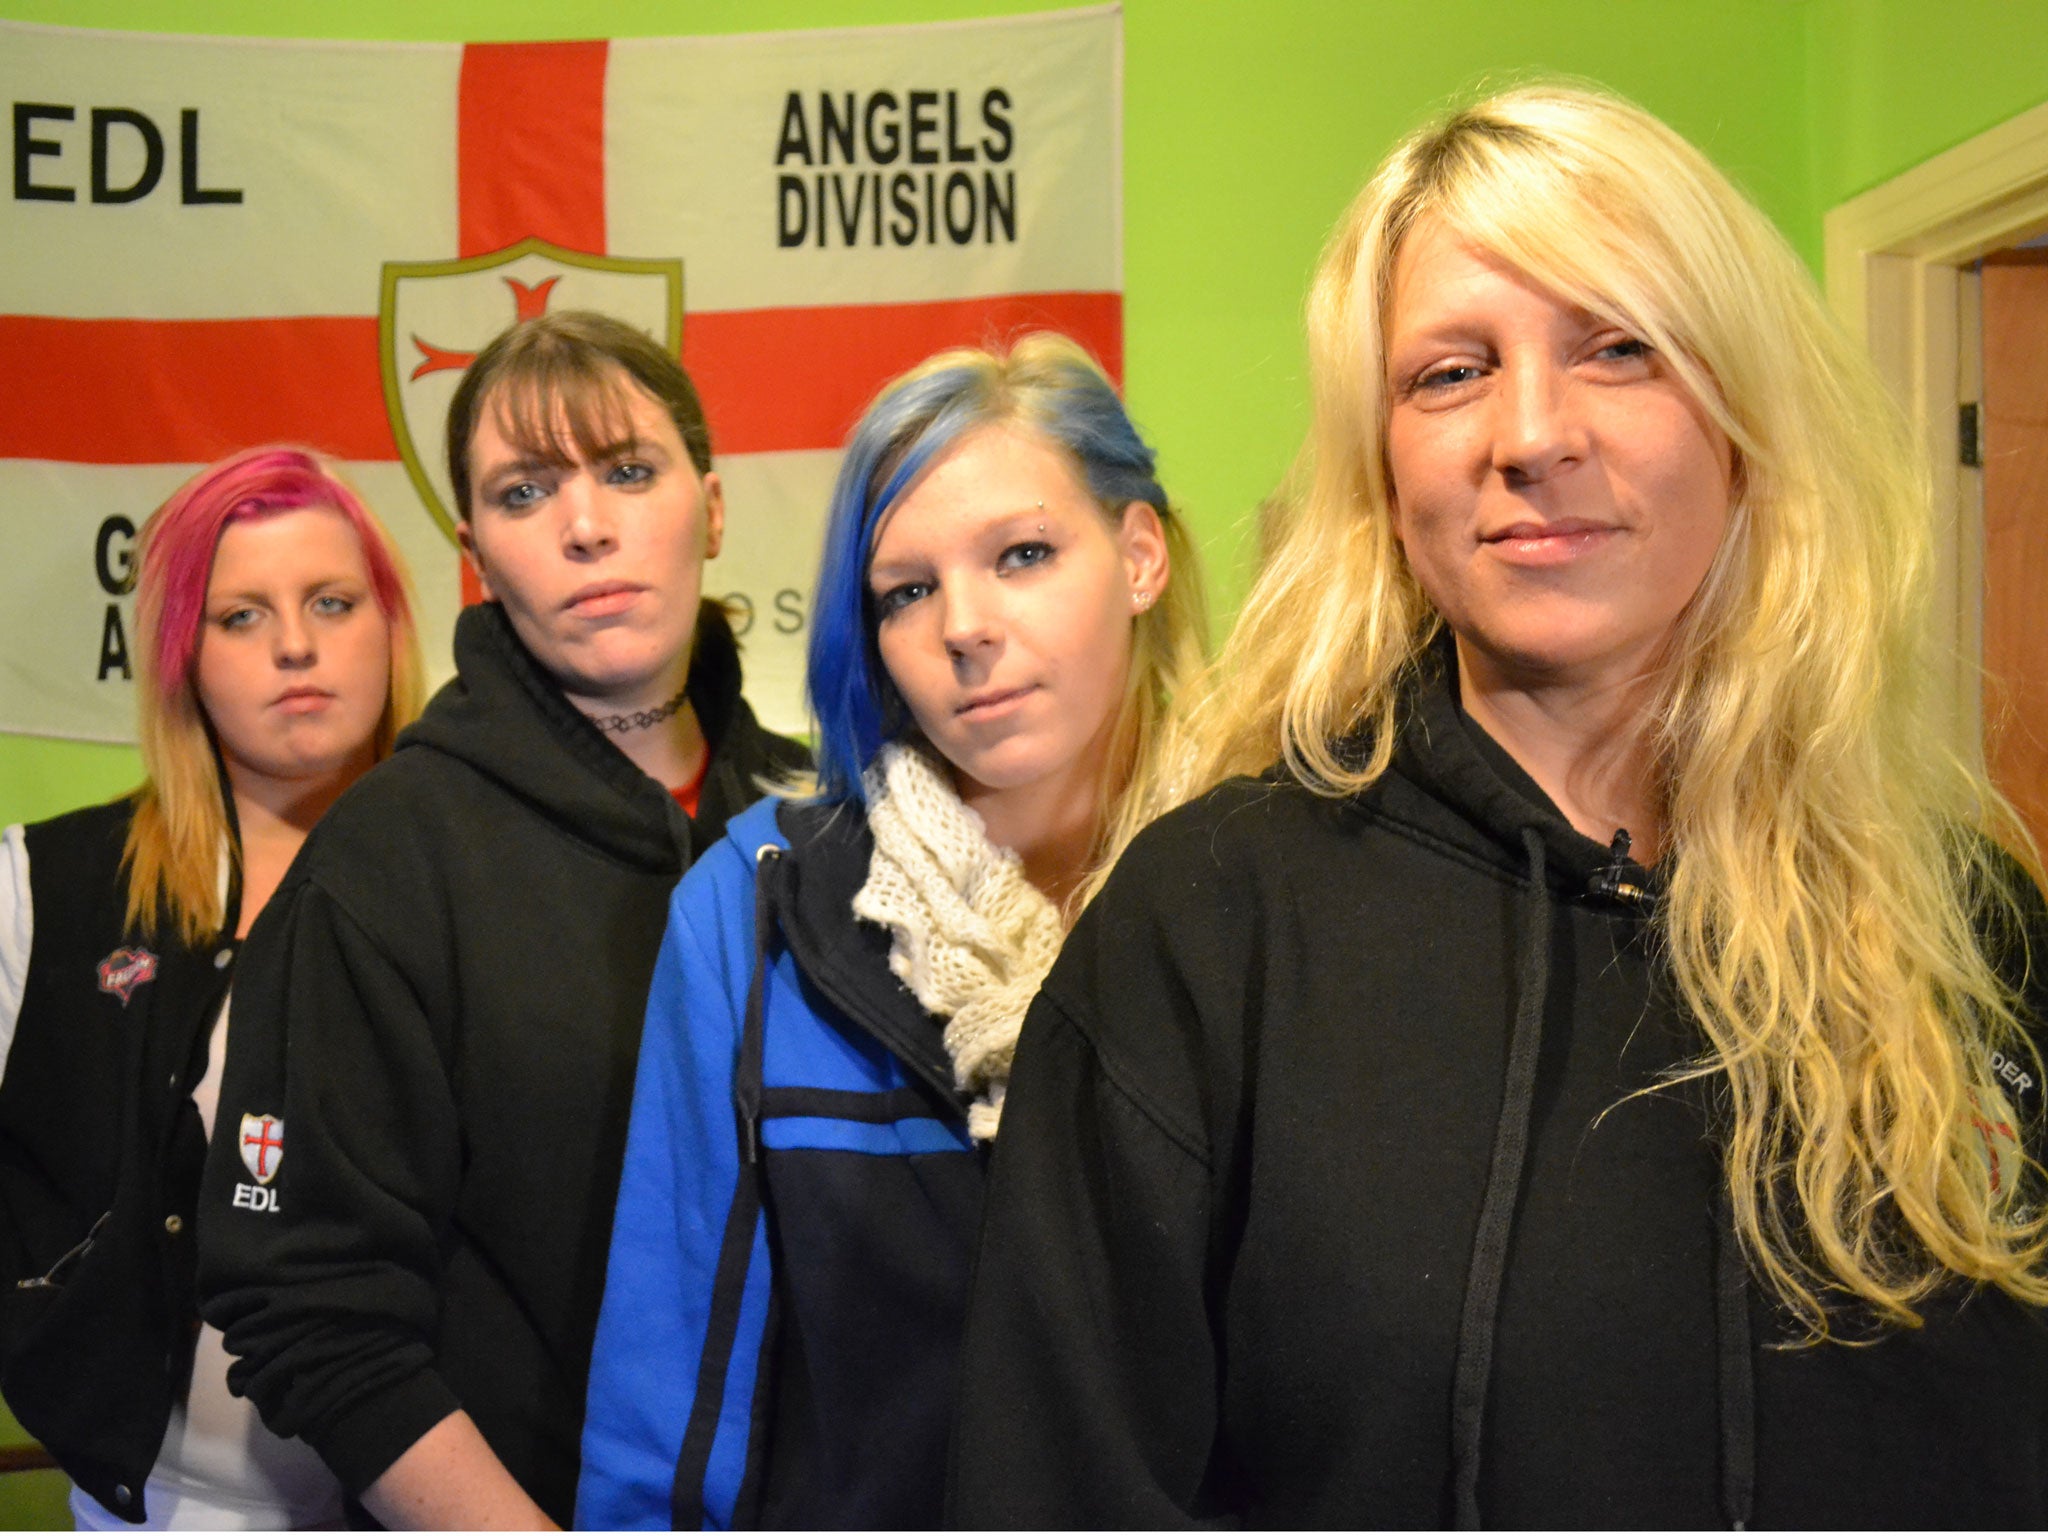 EDL Girls - Don't Call Me Racist follows the lives of some of the notorious organisation's underrepresented female members